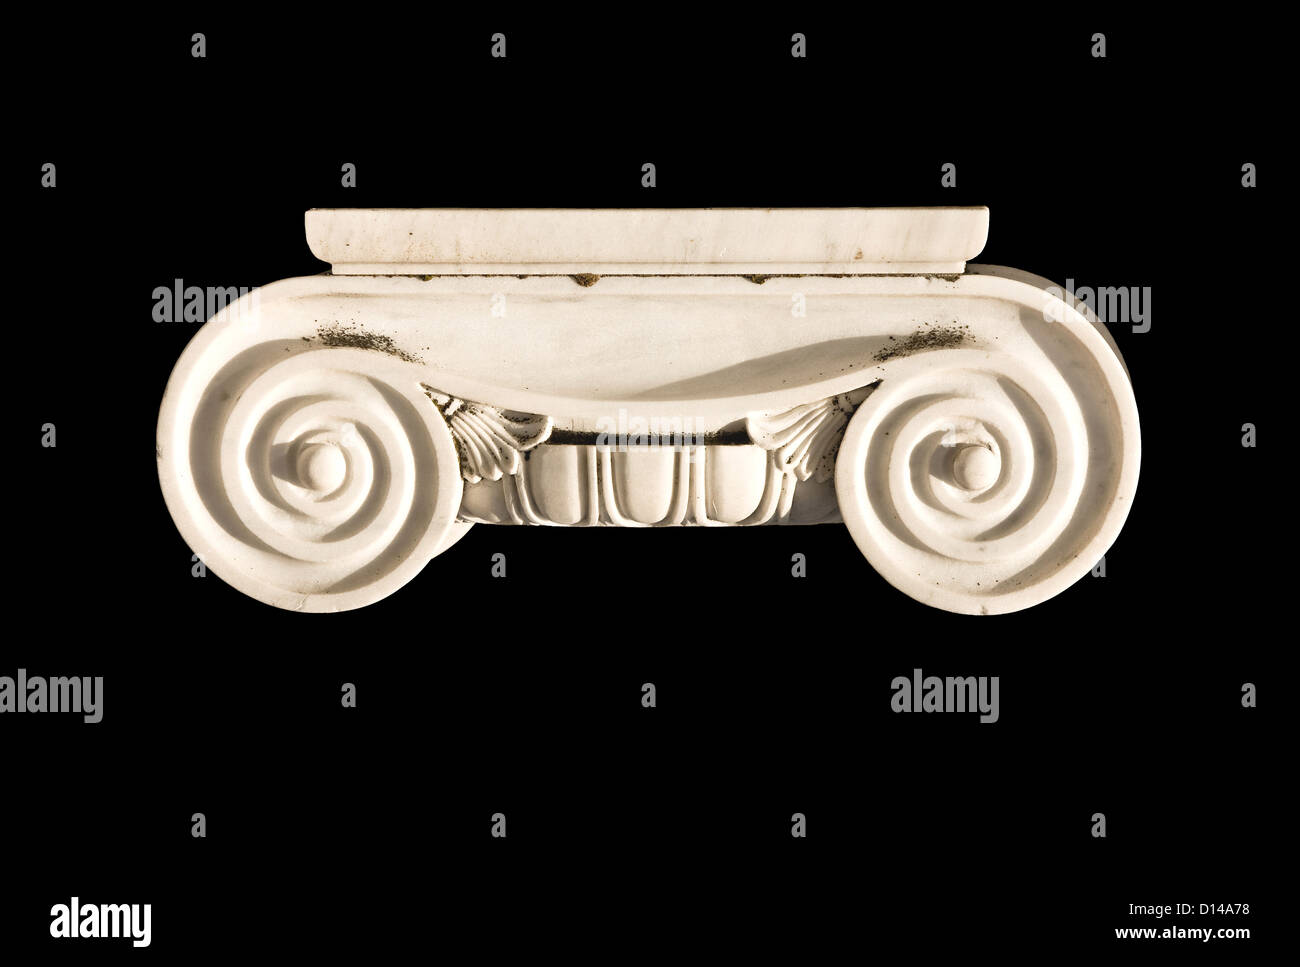 Detail of an ionic order capital from an ancient Greek temple column Stock Photo